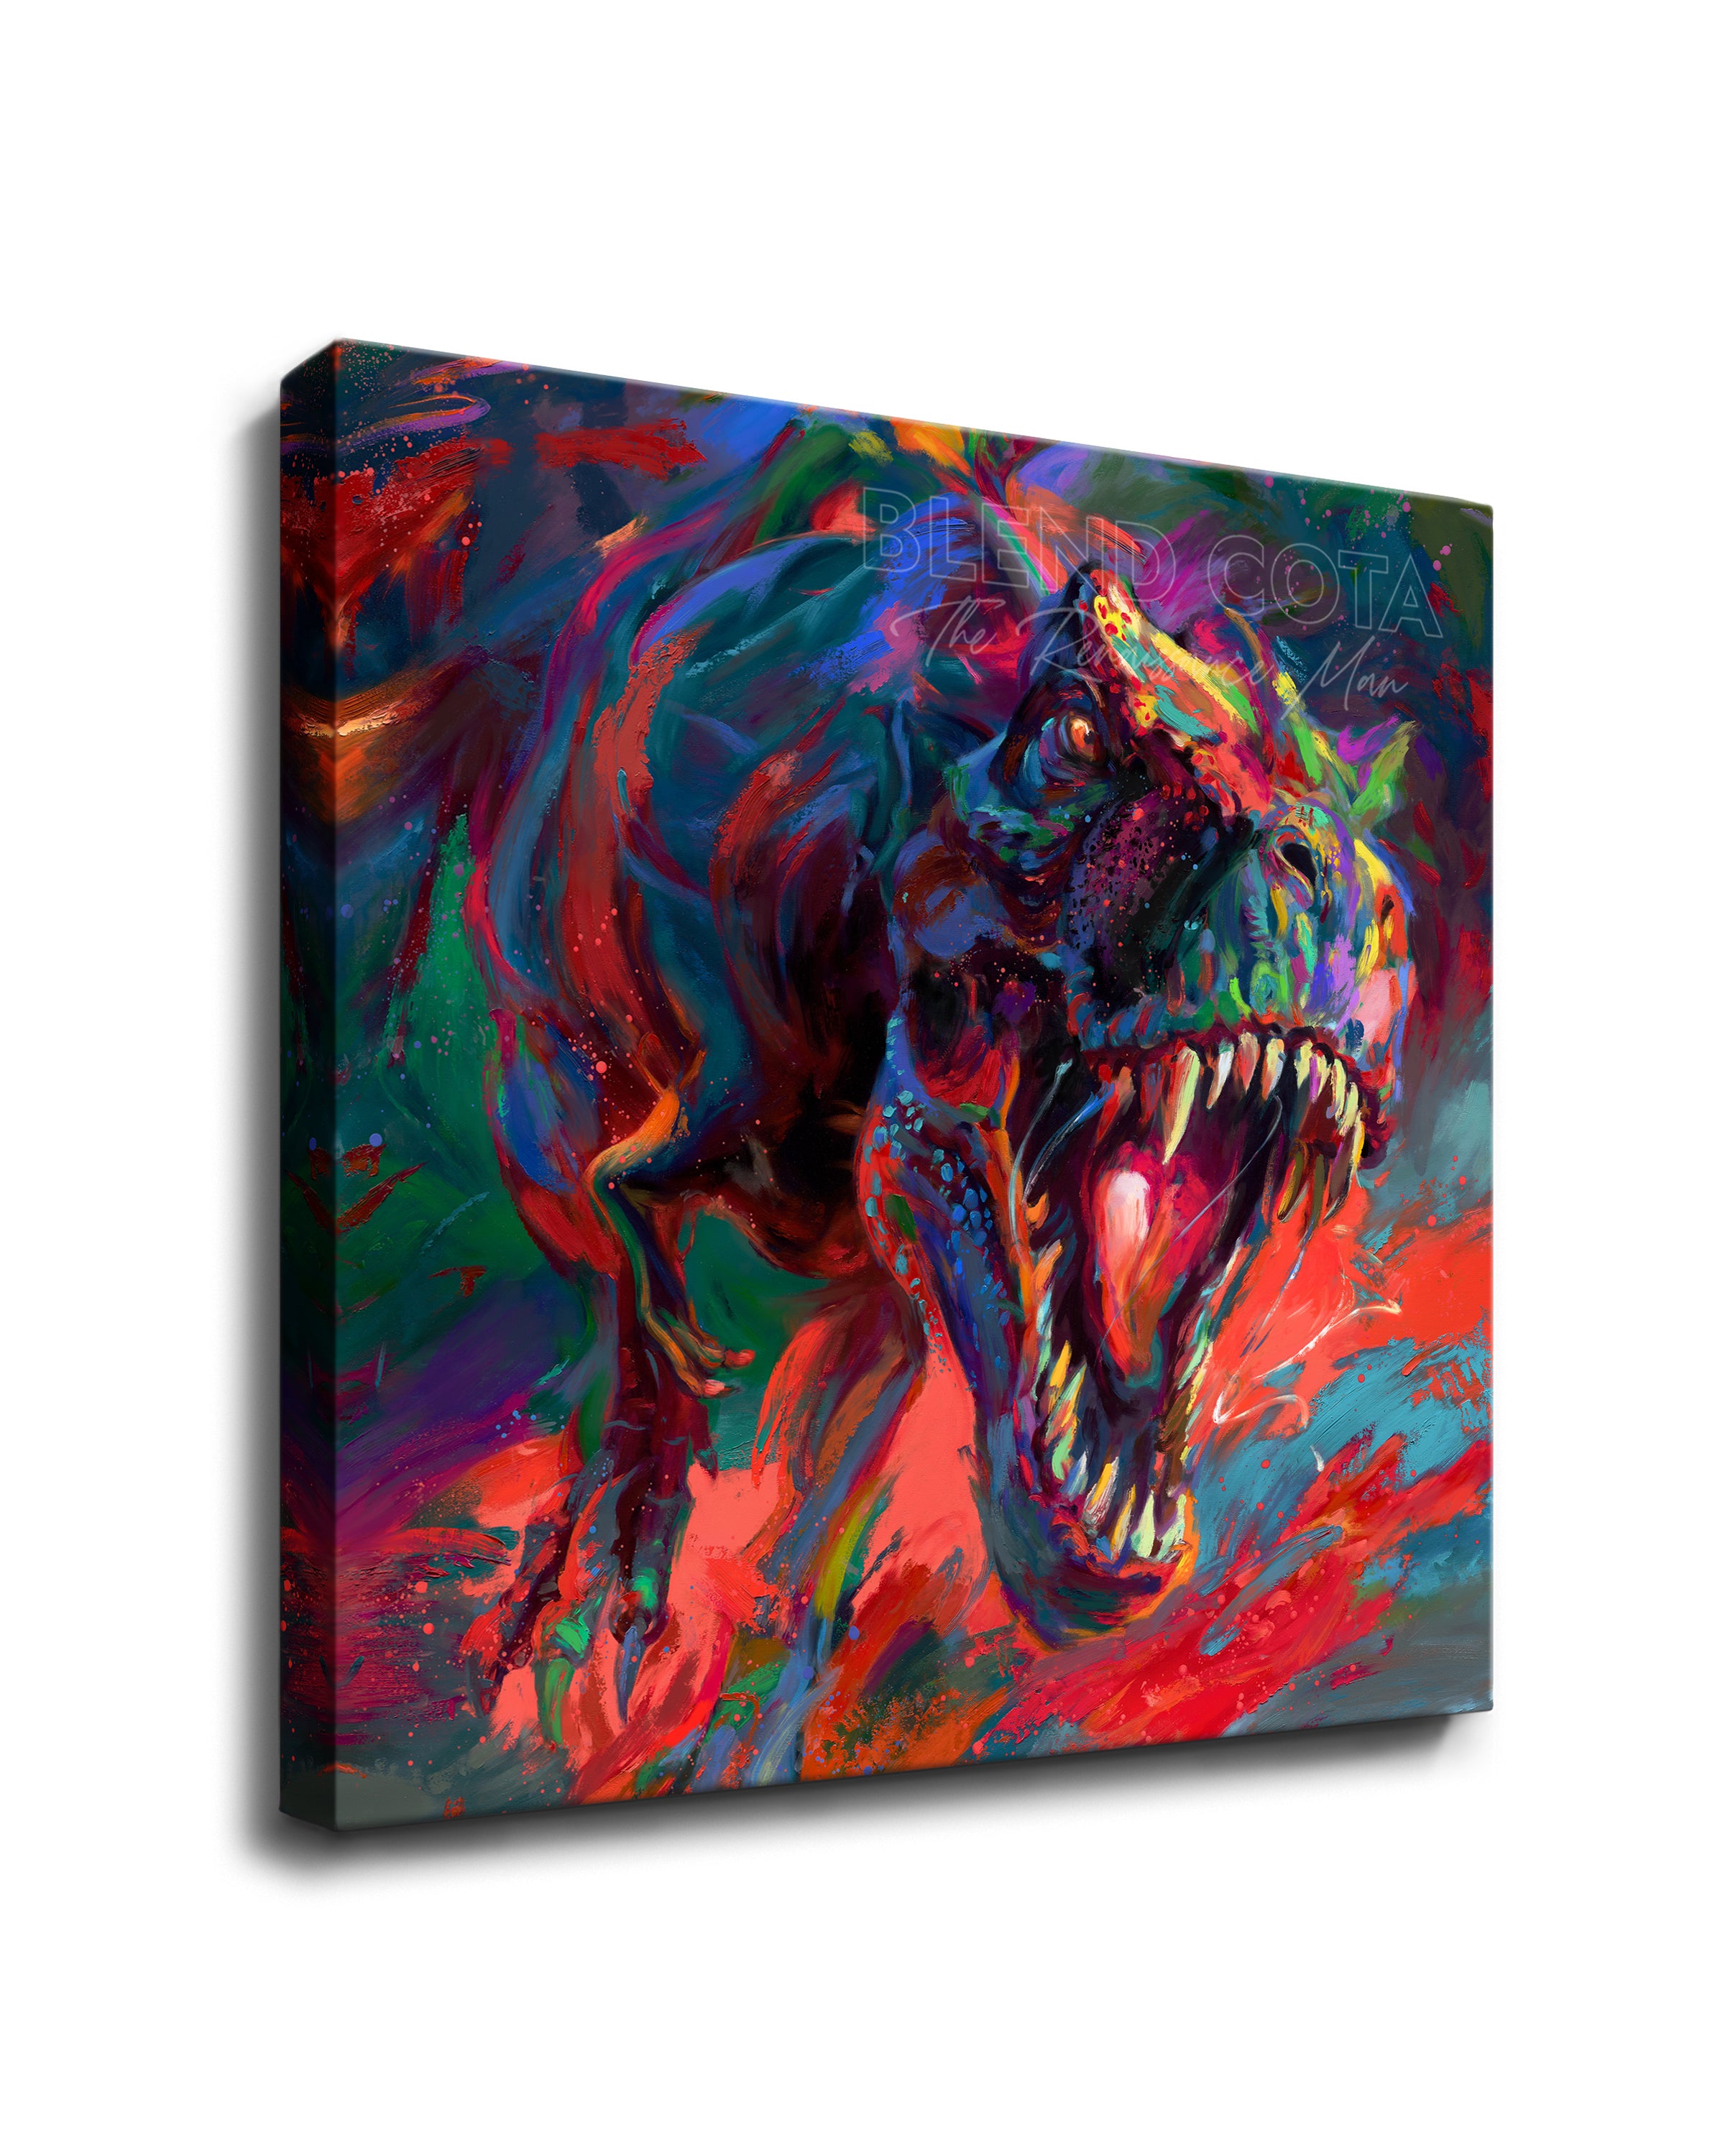 
                  
                    Square format gallery wrapped art print on canvas of the t-rex from jurassic period the apex dinosaur predator jaw full of teeth chasing you, painted with colorful brushstrokes in an expressionistic style.
                  
                